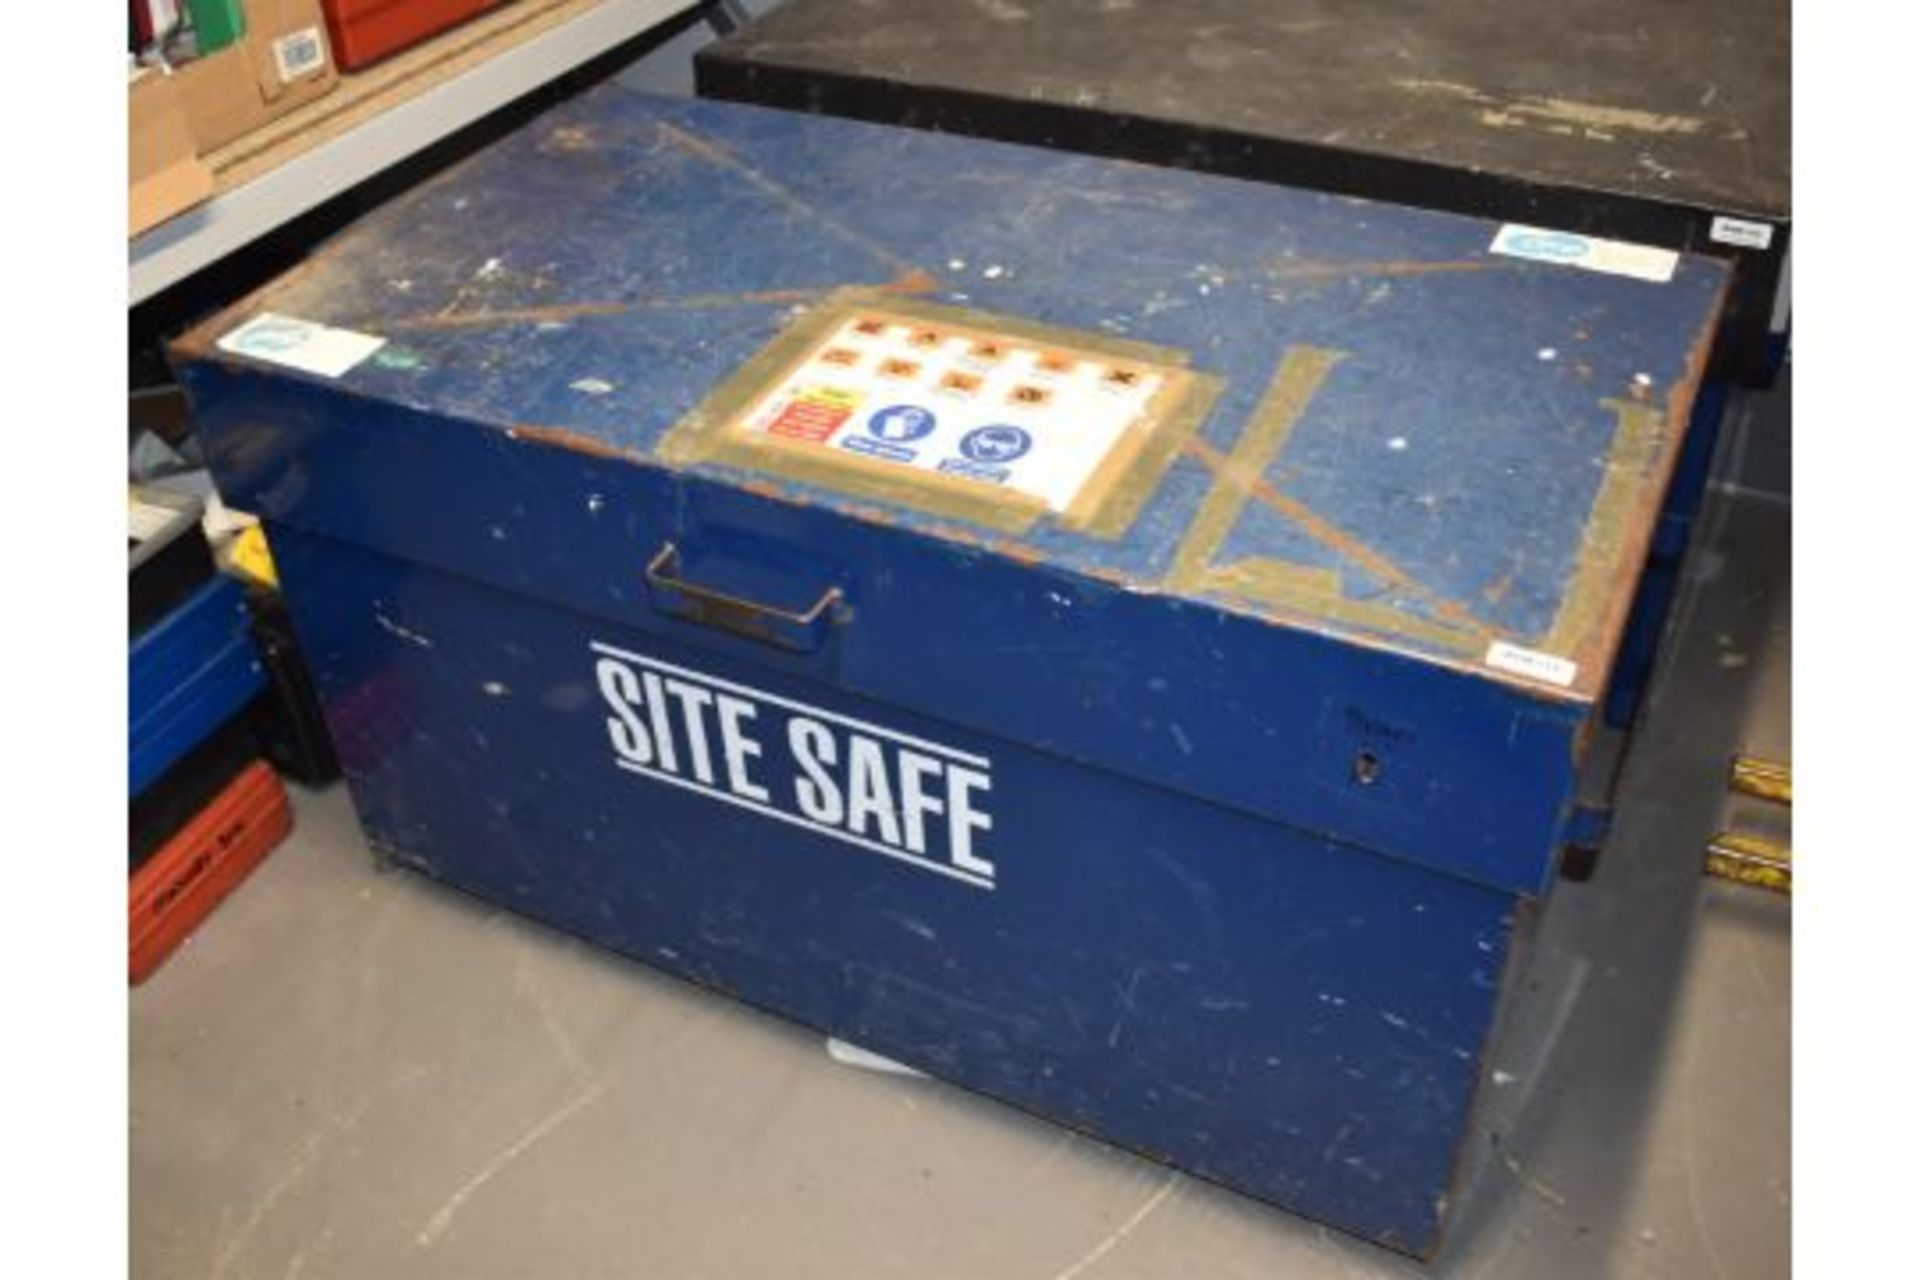 1 x Site Safe Tool Storage Chest - Ideal For Use on Worksites and Vans To Help Protect Your - Image 3 of 4